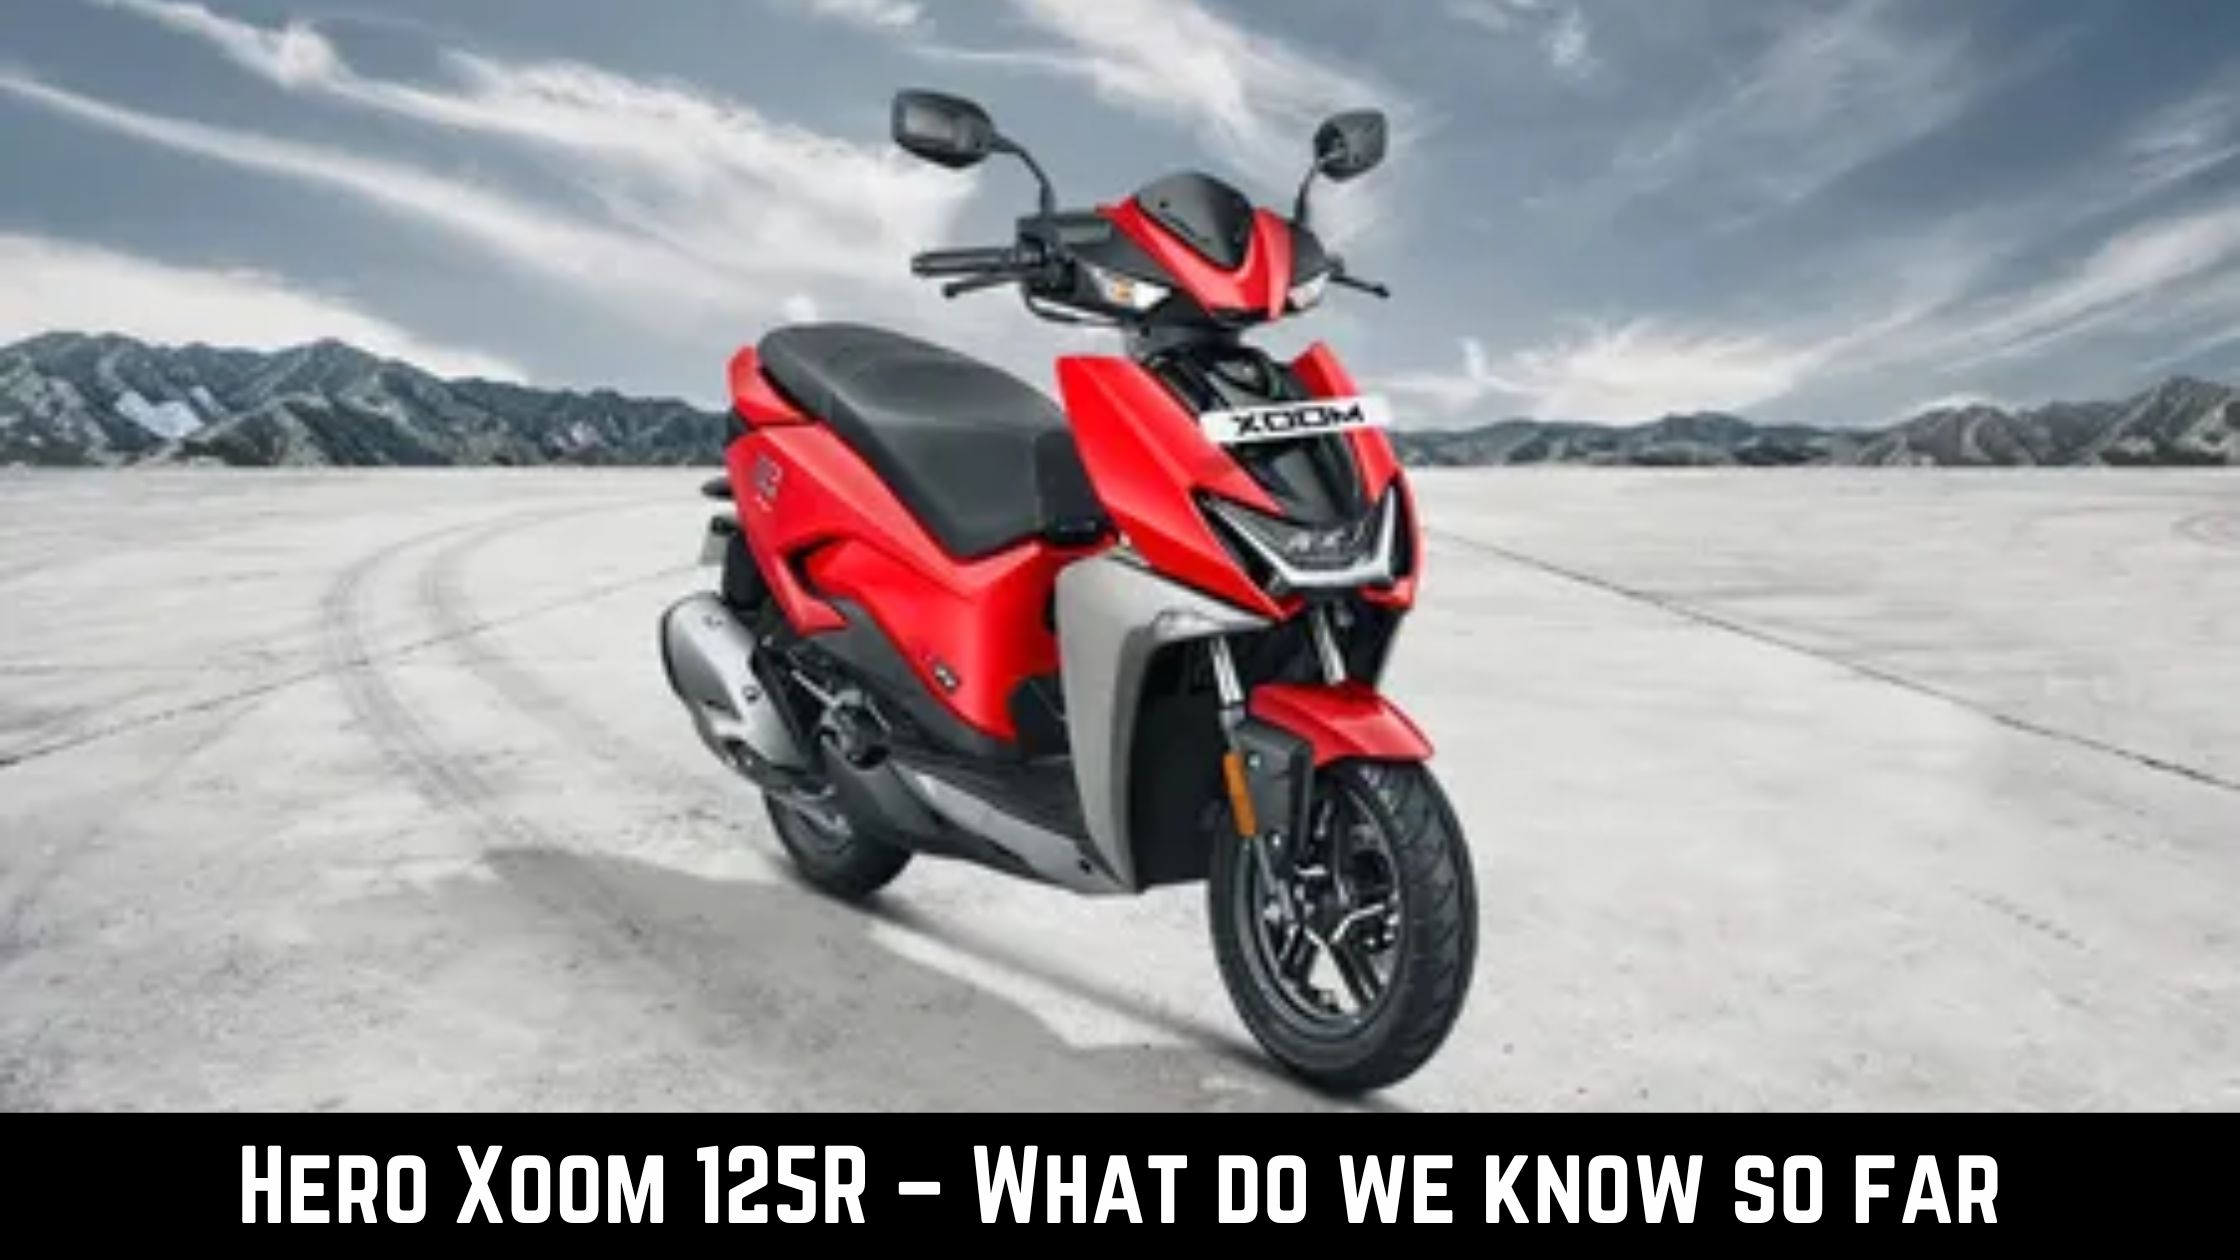 Hero Xoom 125R – What do we know so far